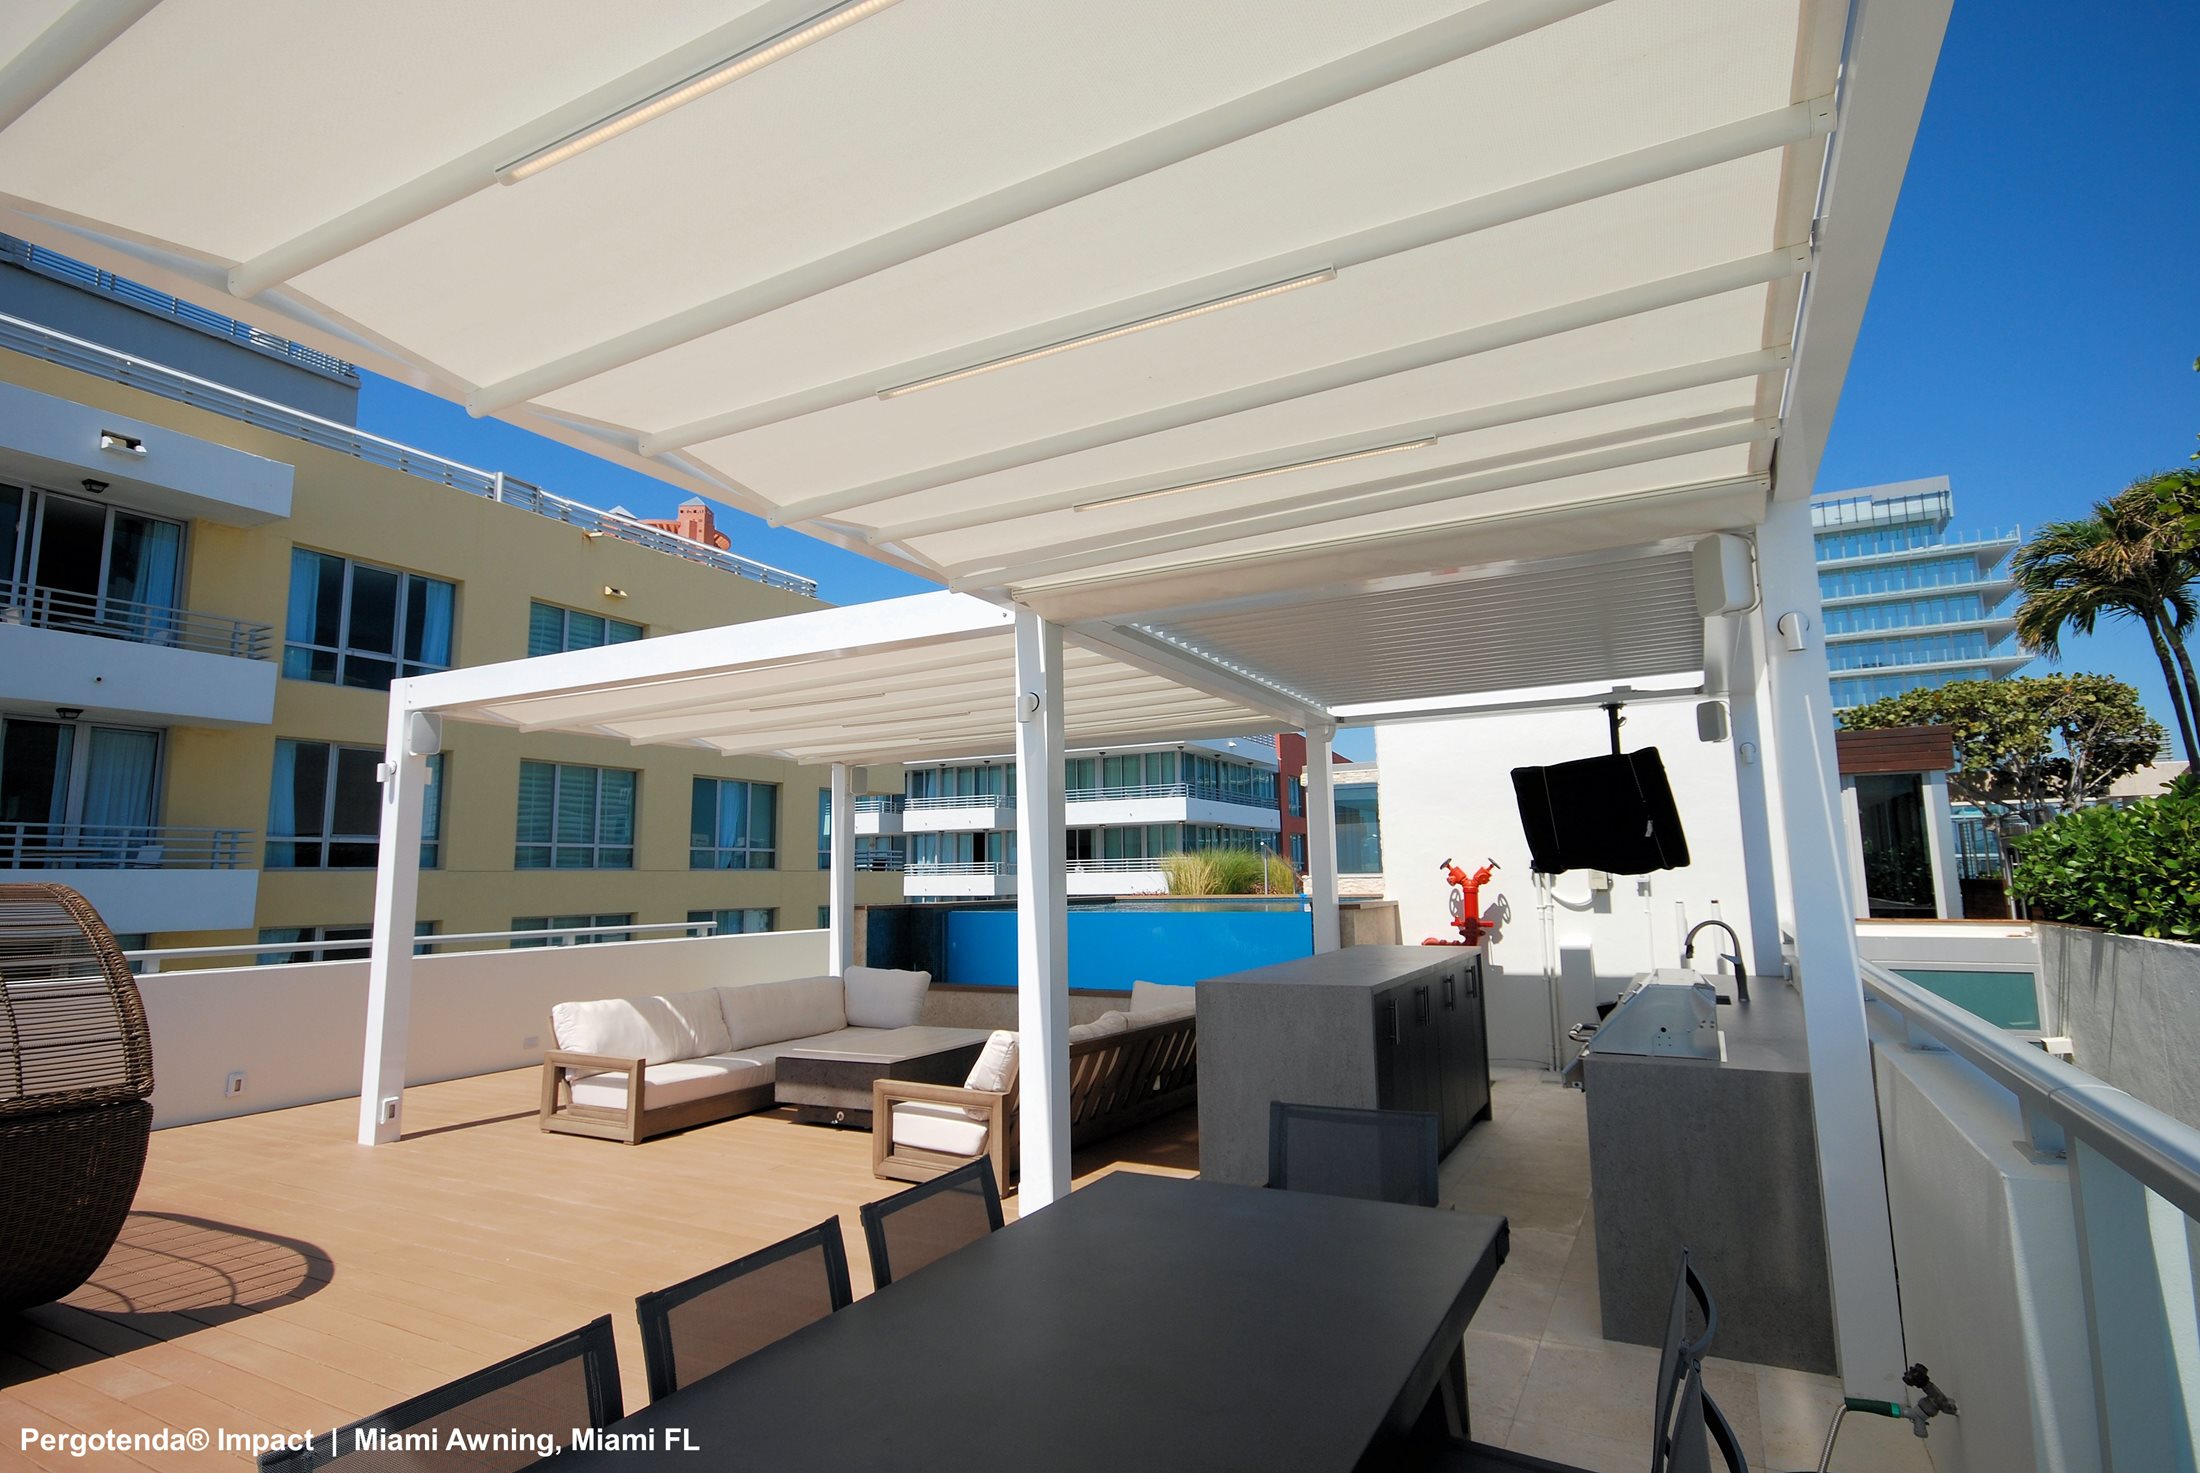 Residence-with-two-Corradi-Shade-Structures-penthouse-area-by-Miami-Awning-Co-(3).jpg